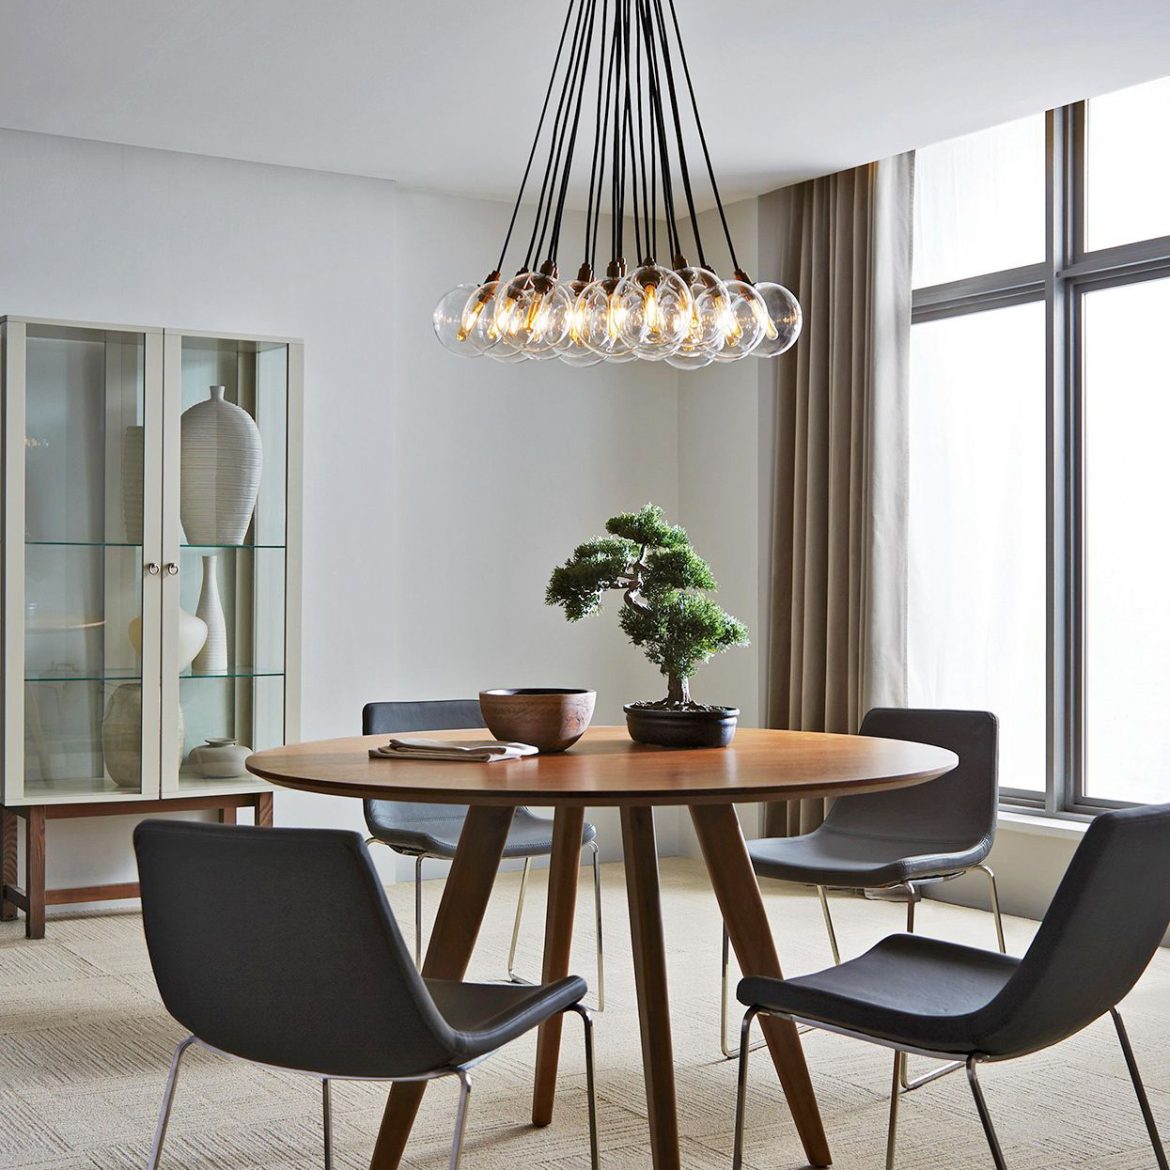 Graceful Glow: Elevating Your Dining Experience with an Elegant Chandelier